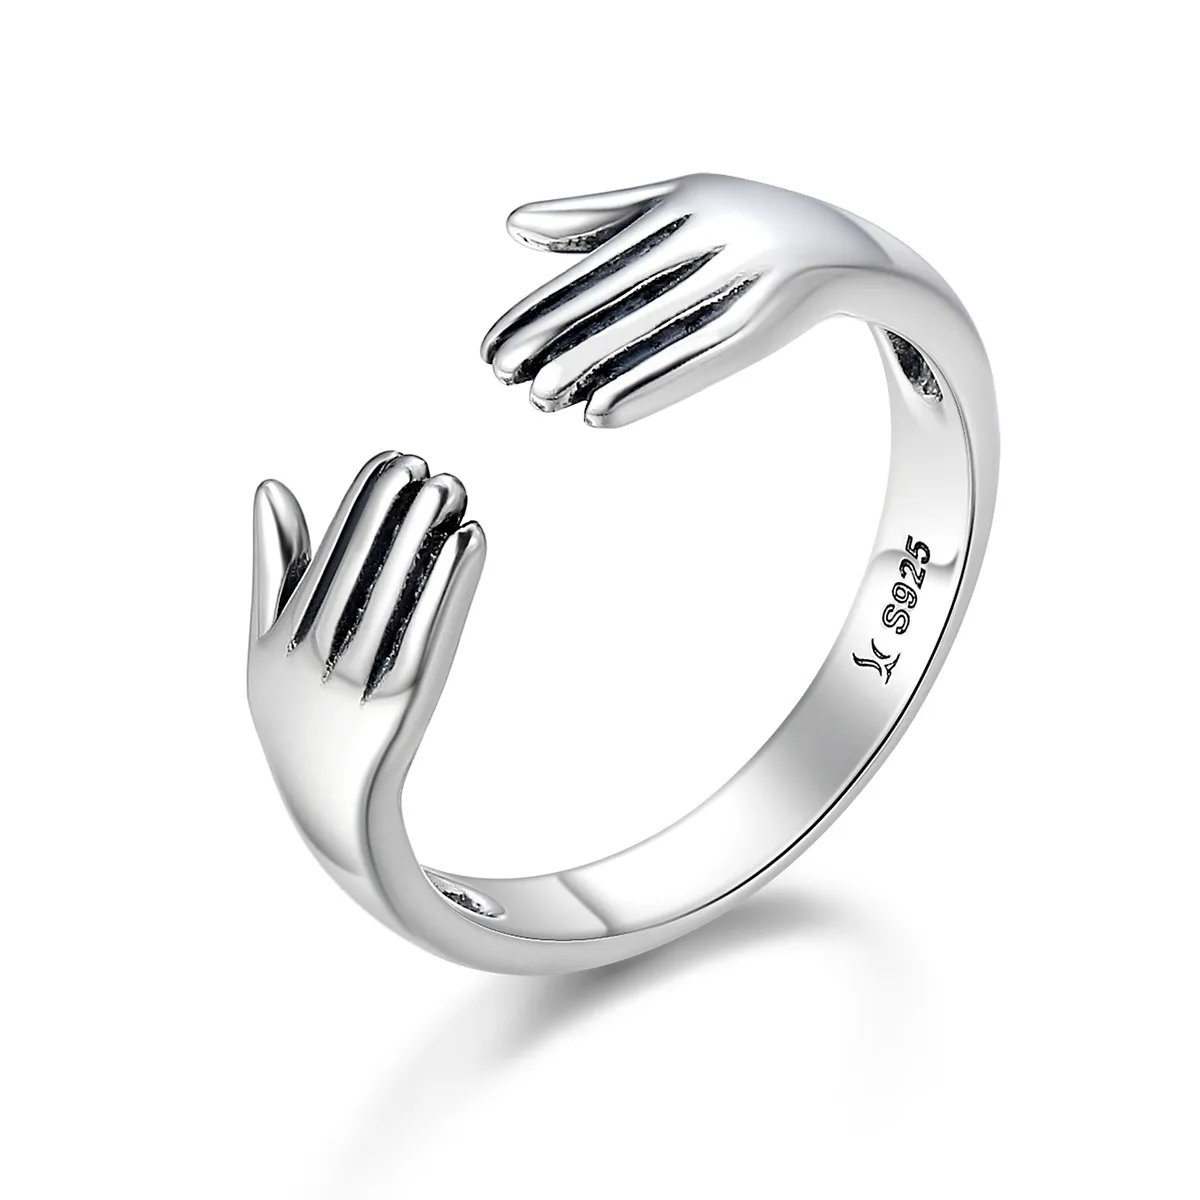 Pandora Style Silver Give Me A Hug Ring - SCR136